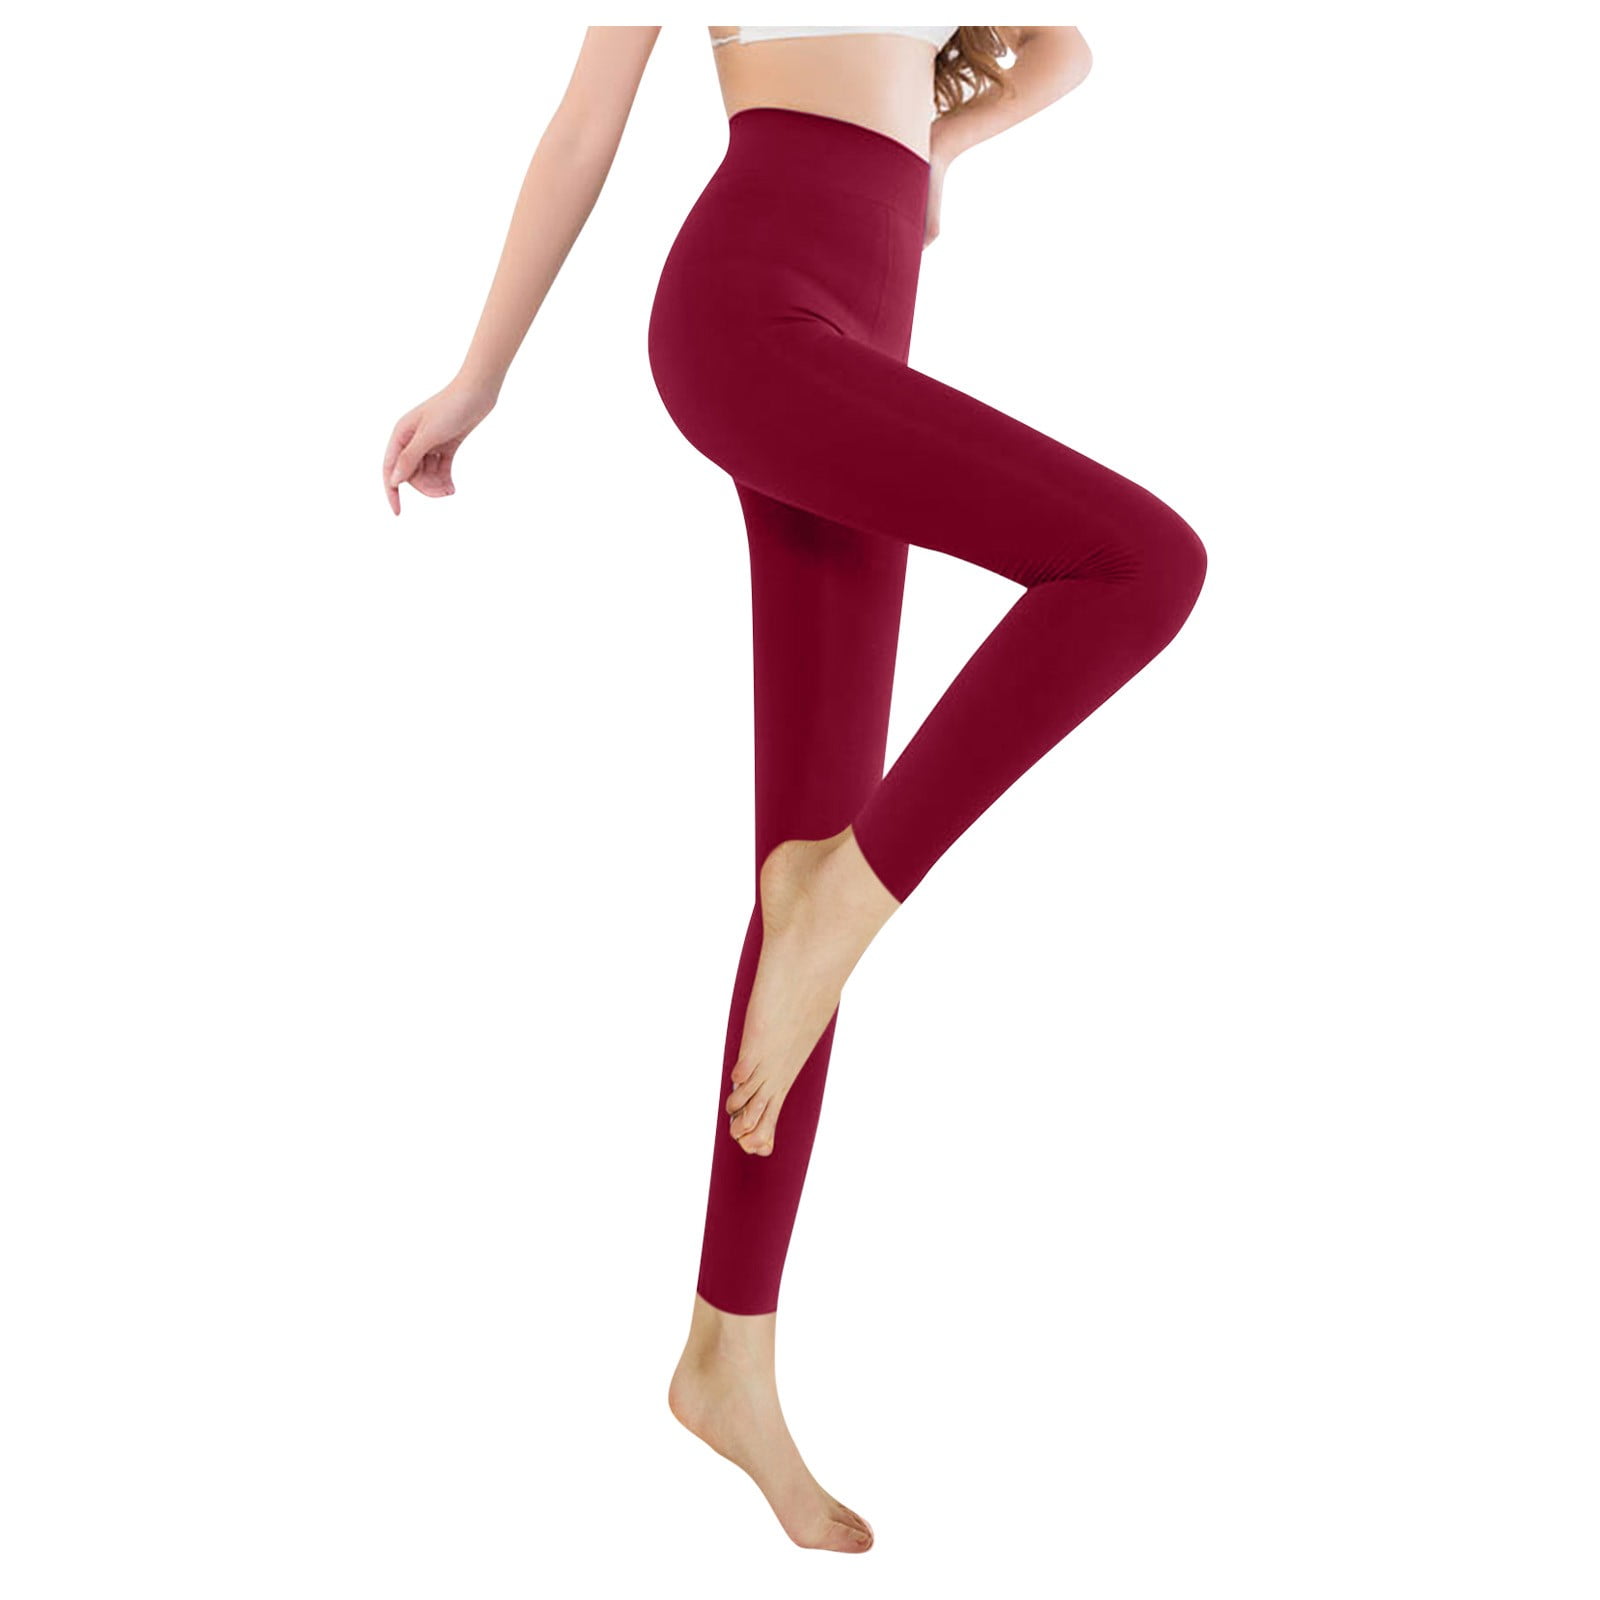 YDOJG Soft Leggings For Women Tummy Control Fashion Women Brushed Stretch  Lined Thick Tights Warm Winter Pants Warm Leggings Ankle-Length Pants L